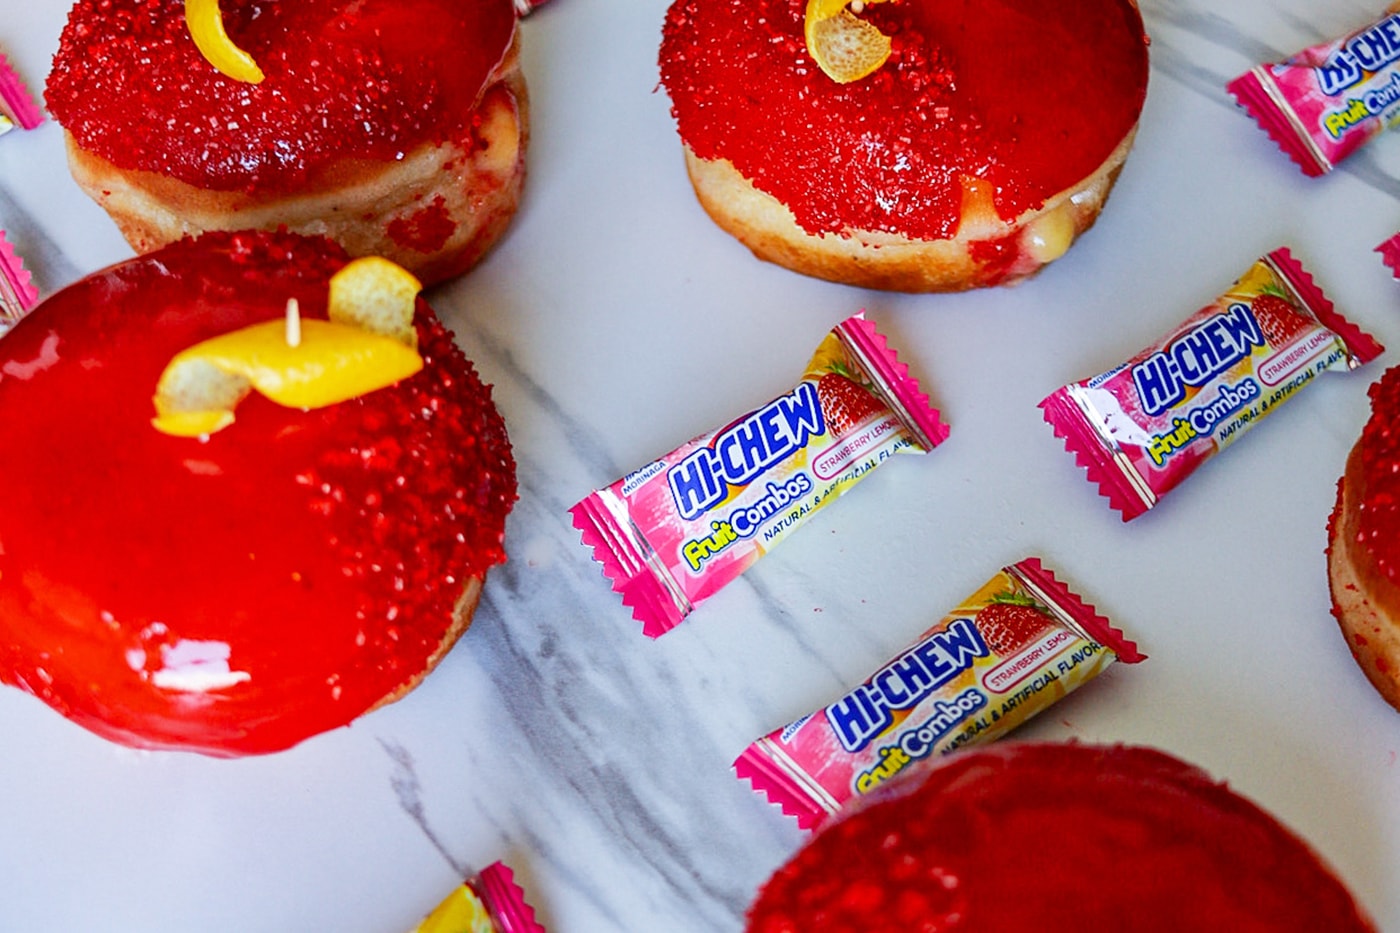 The Doughnut Project HI-CHEW Limited-edition doughnuts release